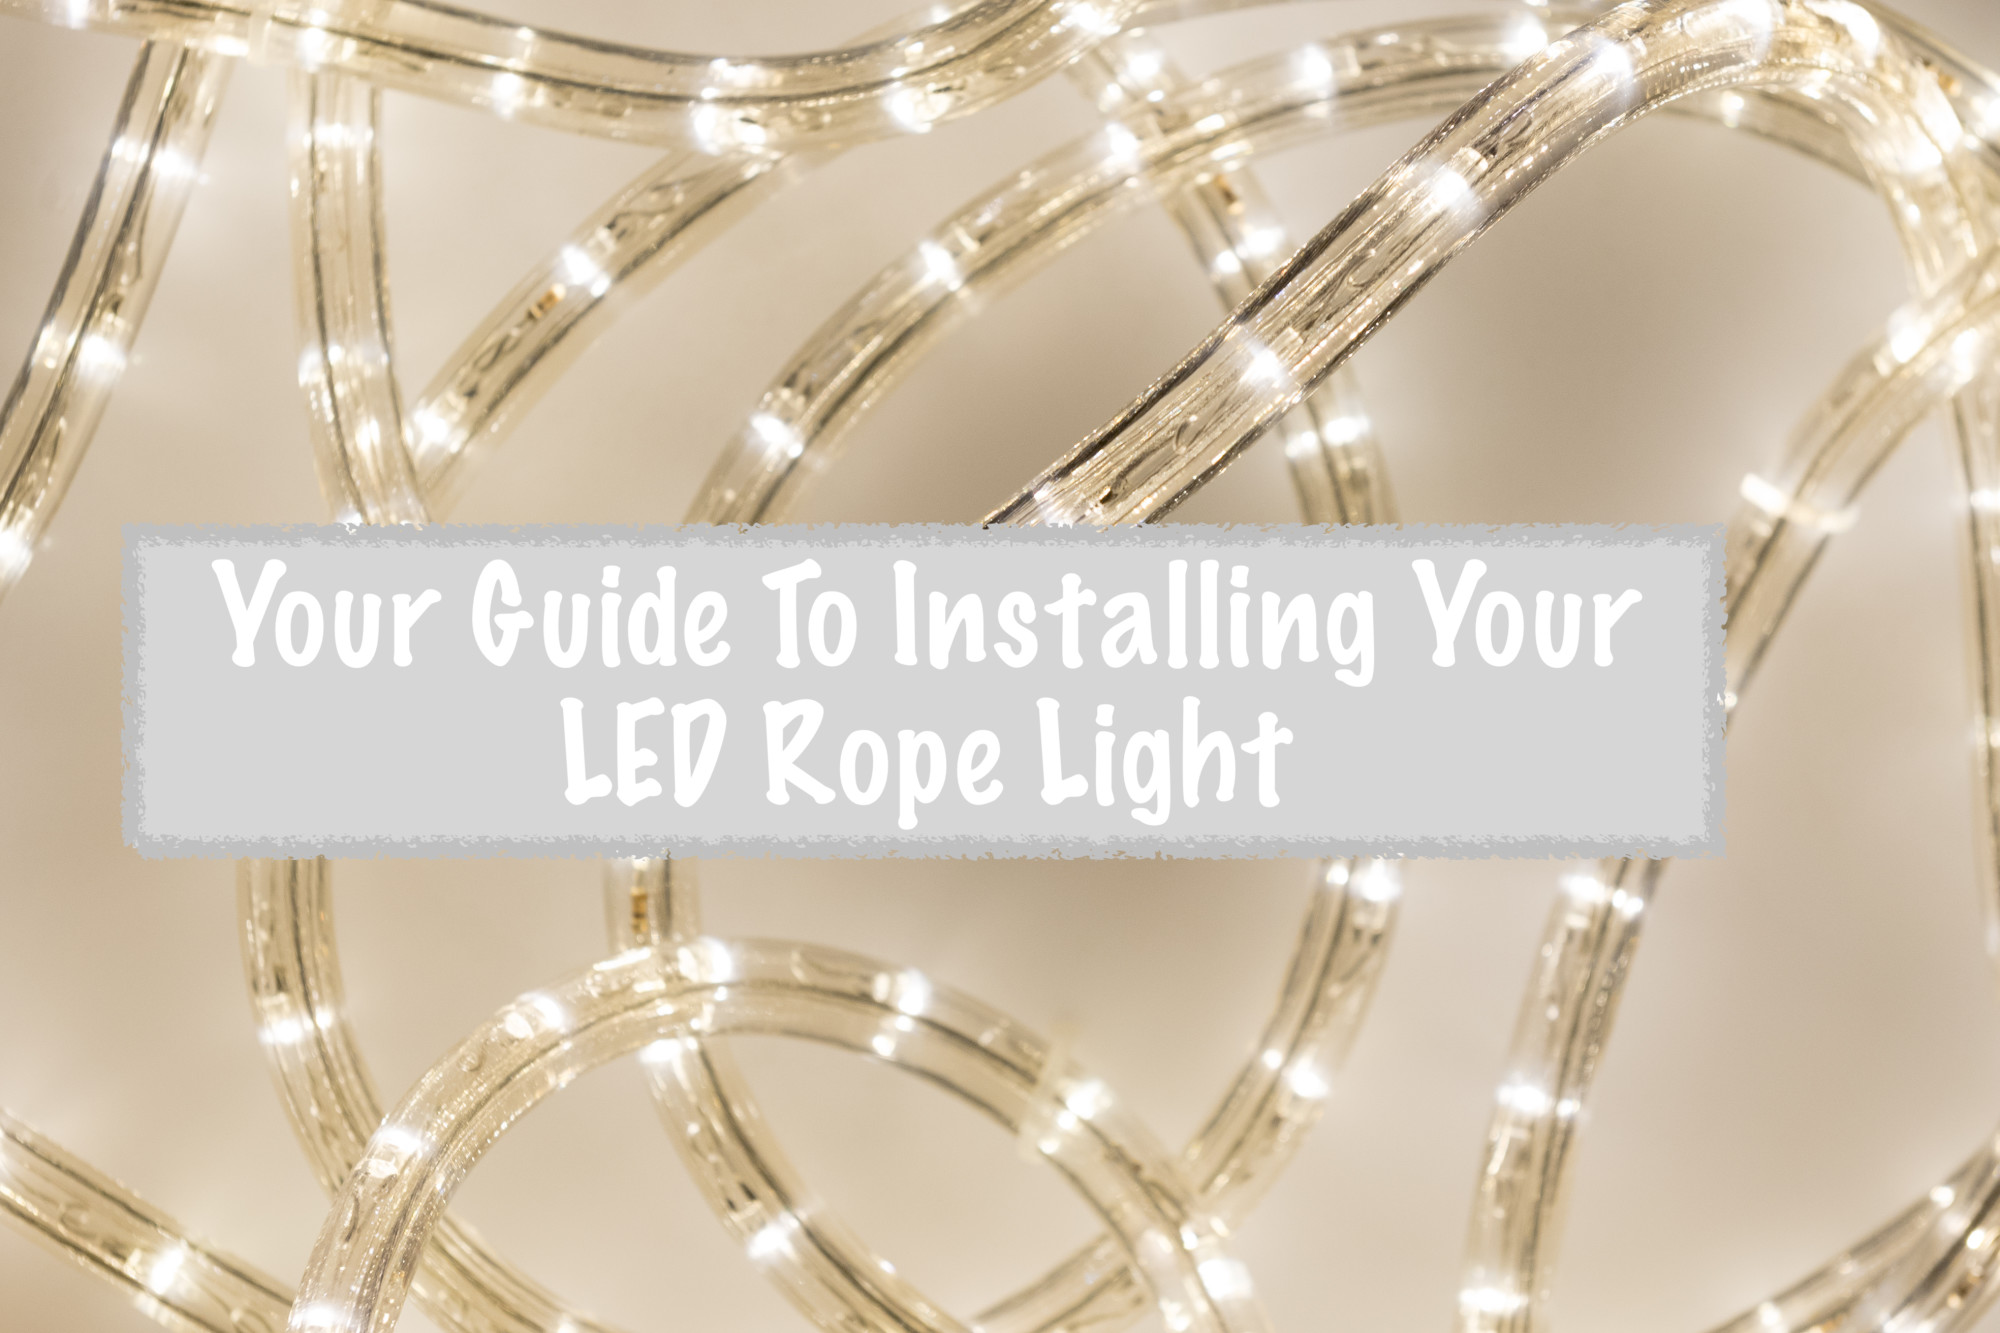 Your Guide To Installing Your LED Rope Light - Birddog Lighting